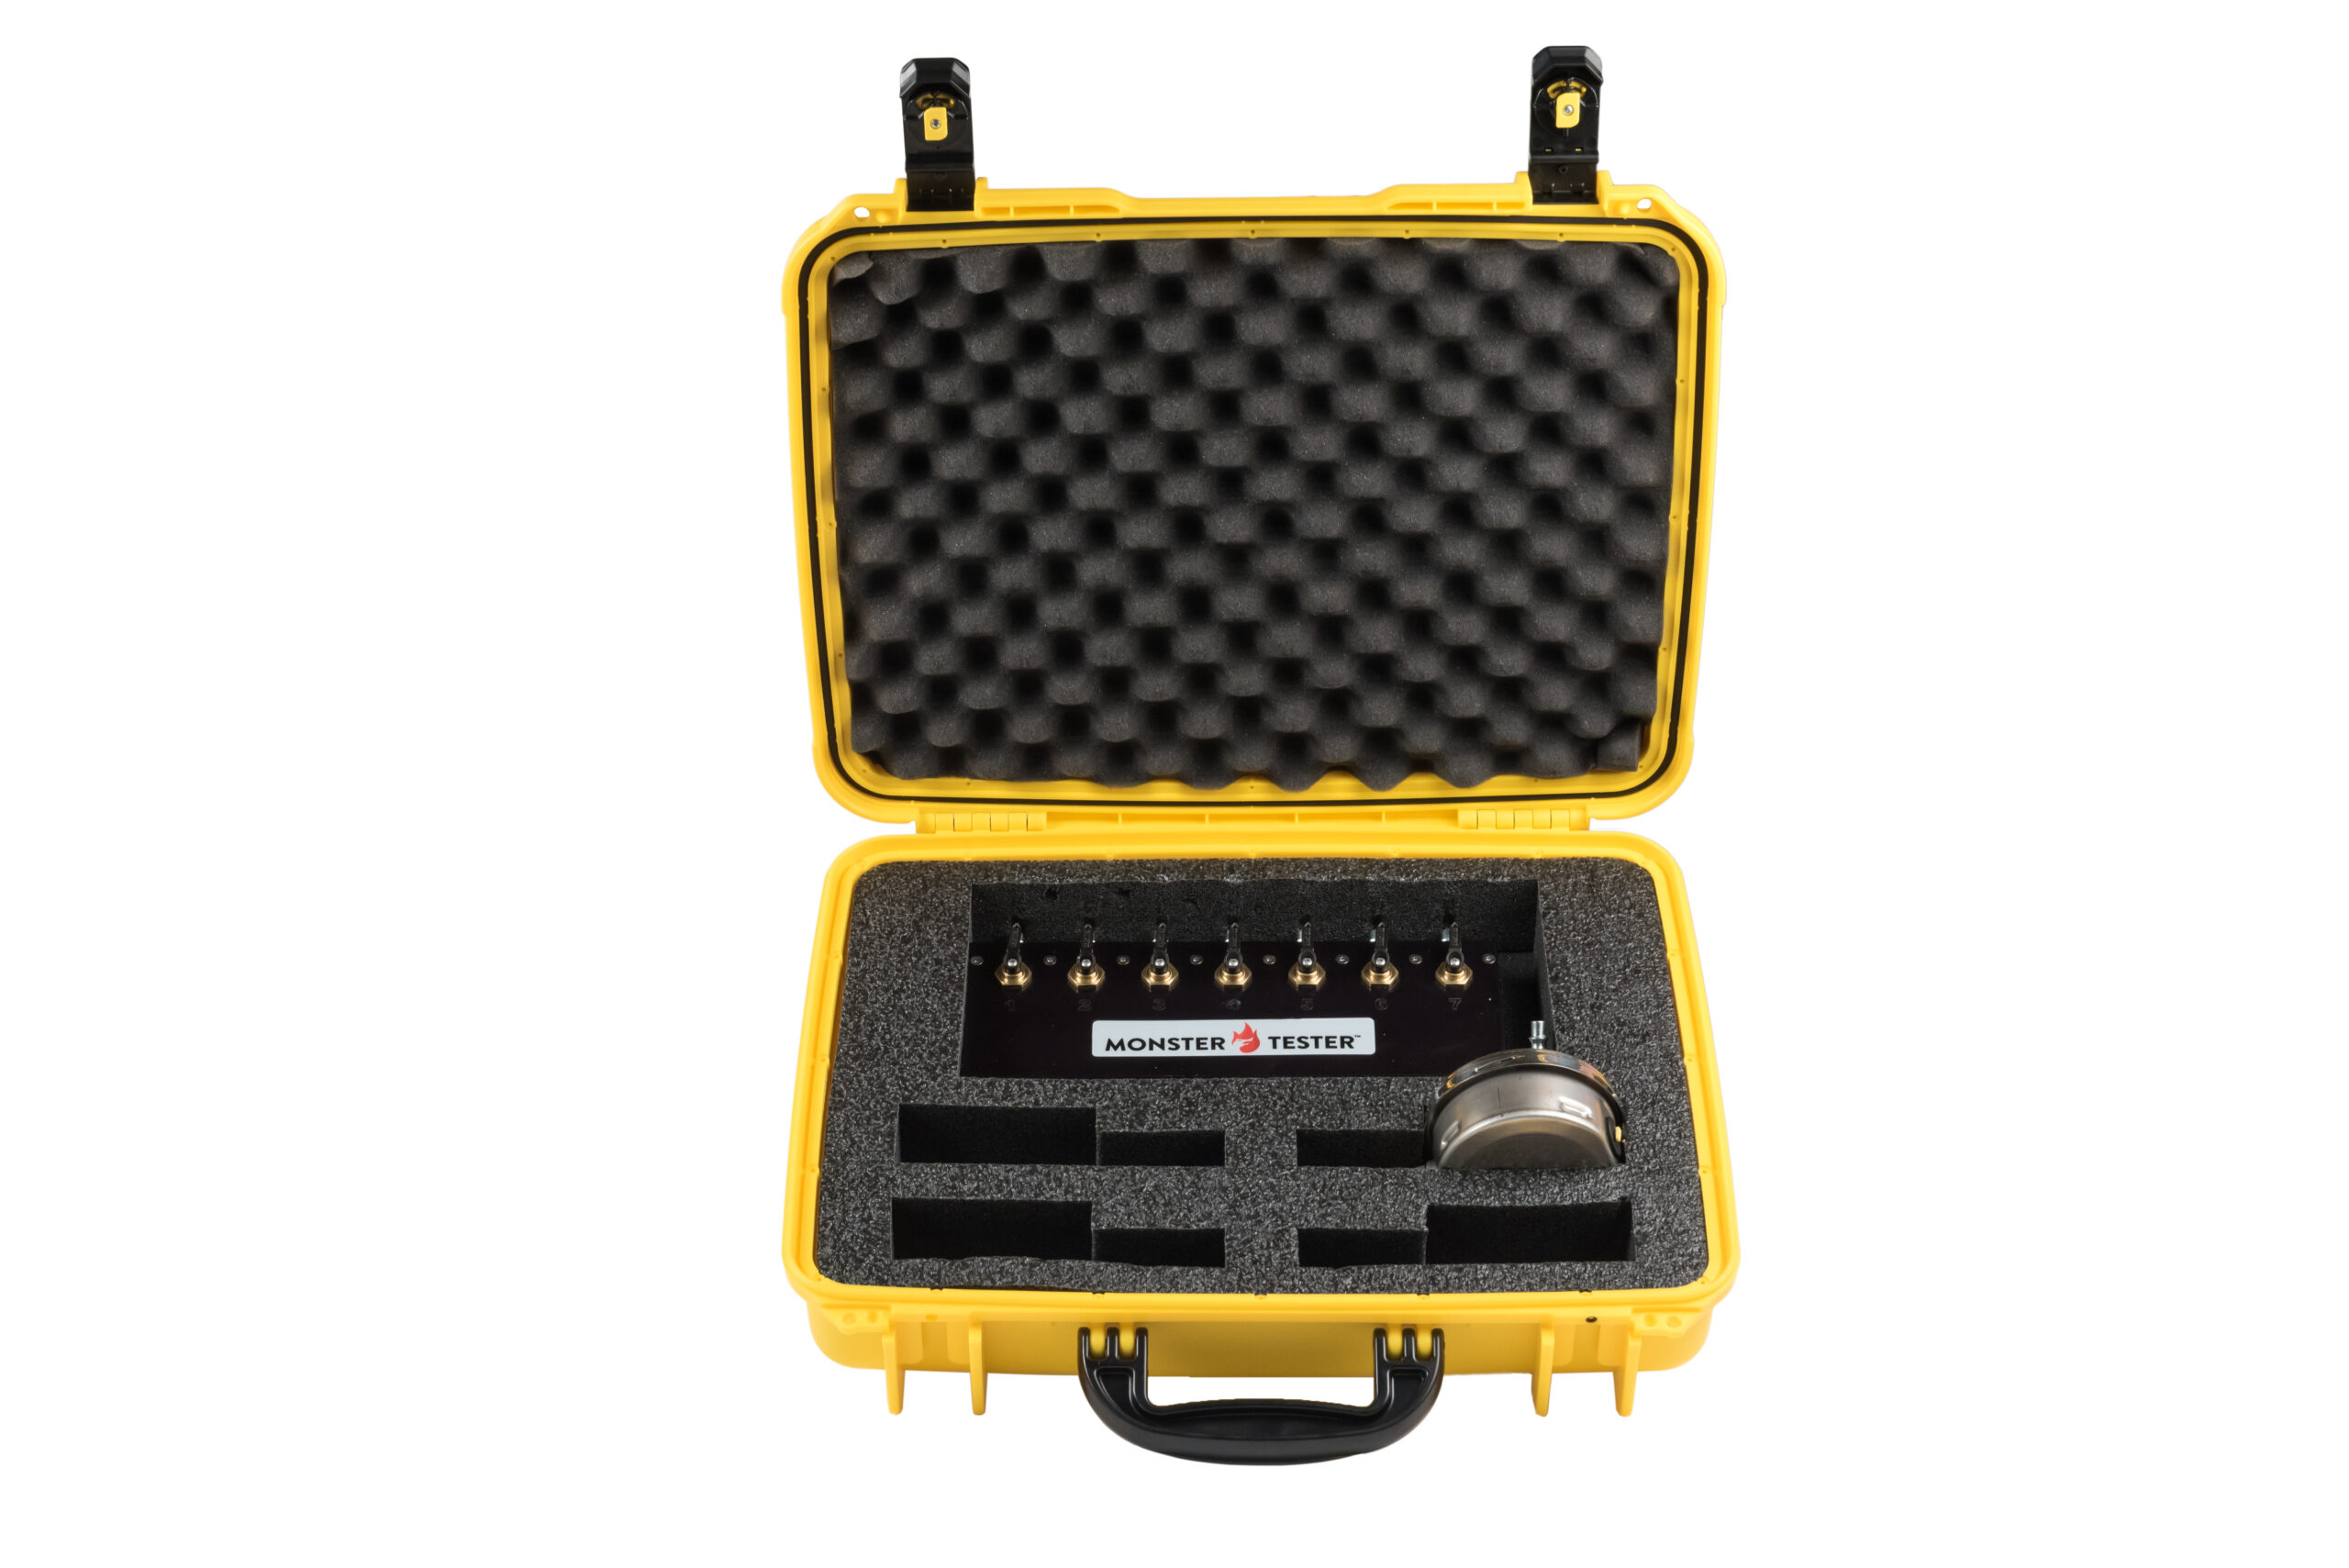 Hose Monster provides products such as this Monster Tester and Tube Set with a gauge for pressure testing.